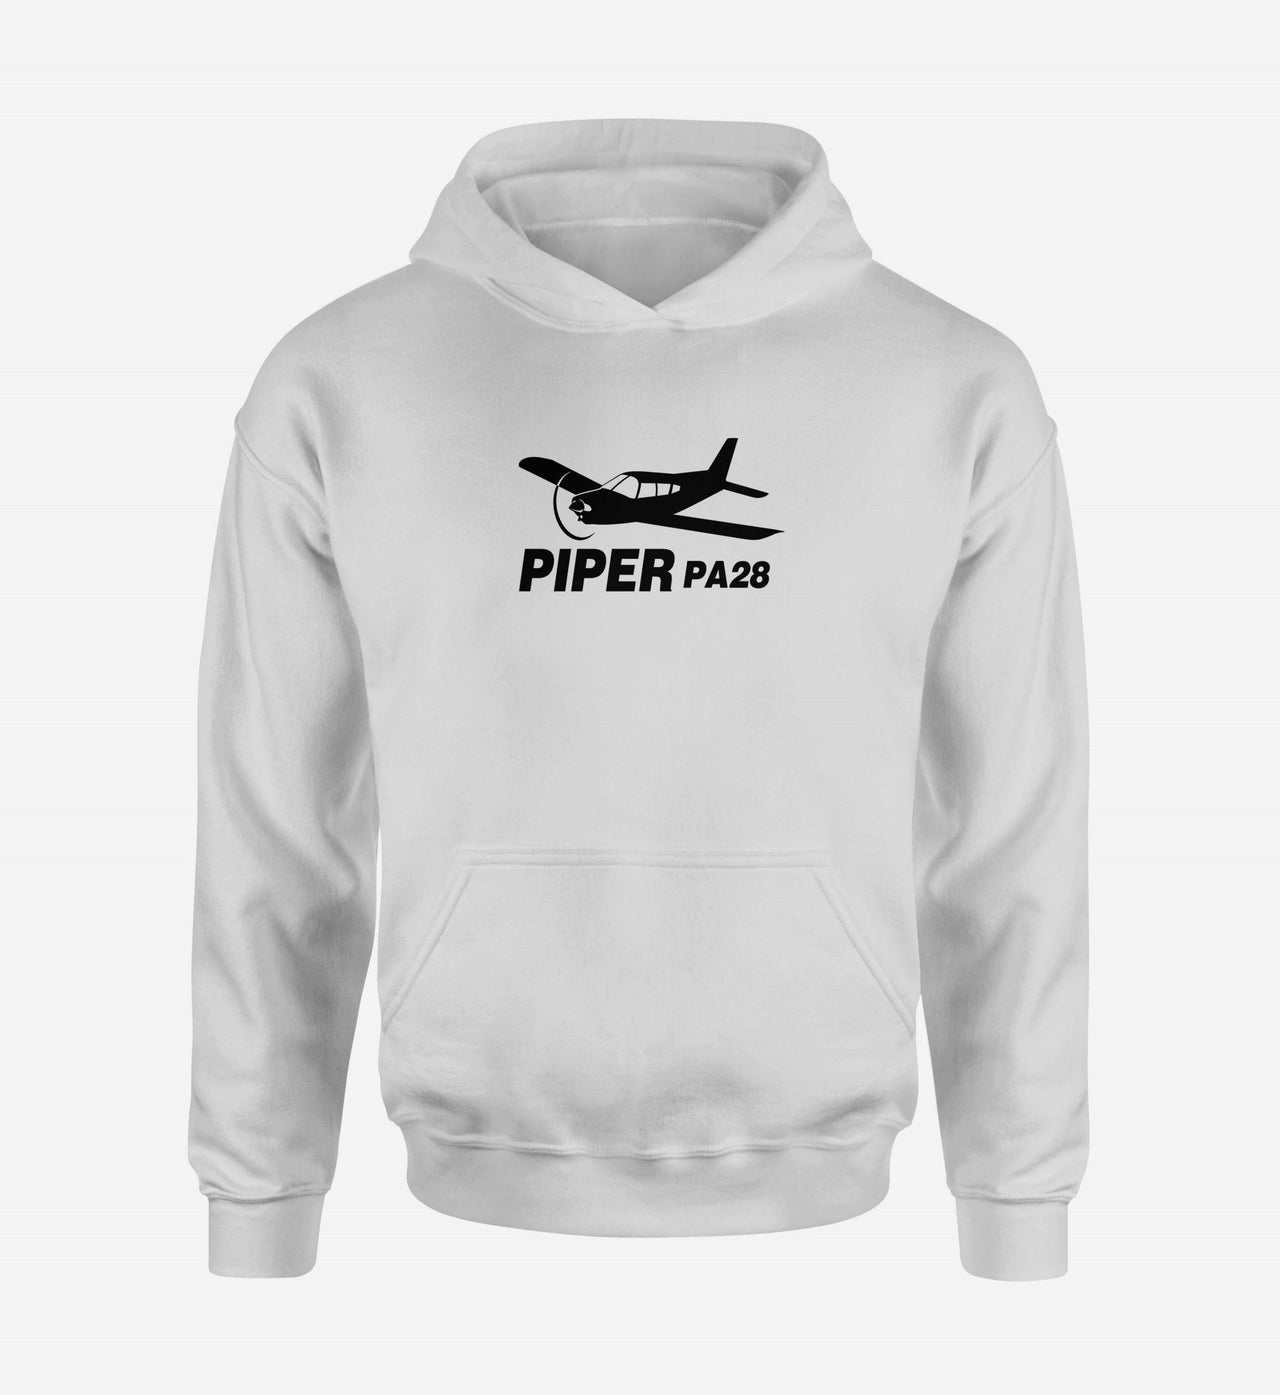 The Piper PA28 Designed Hoodies